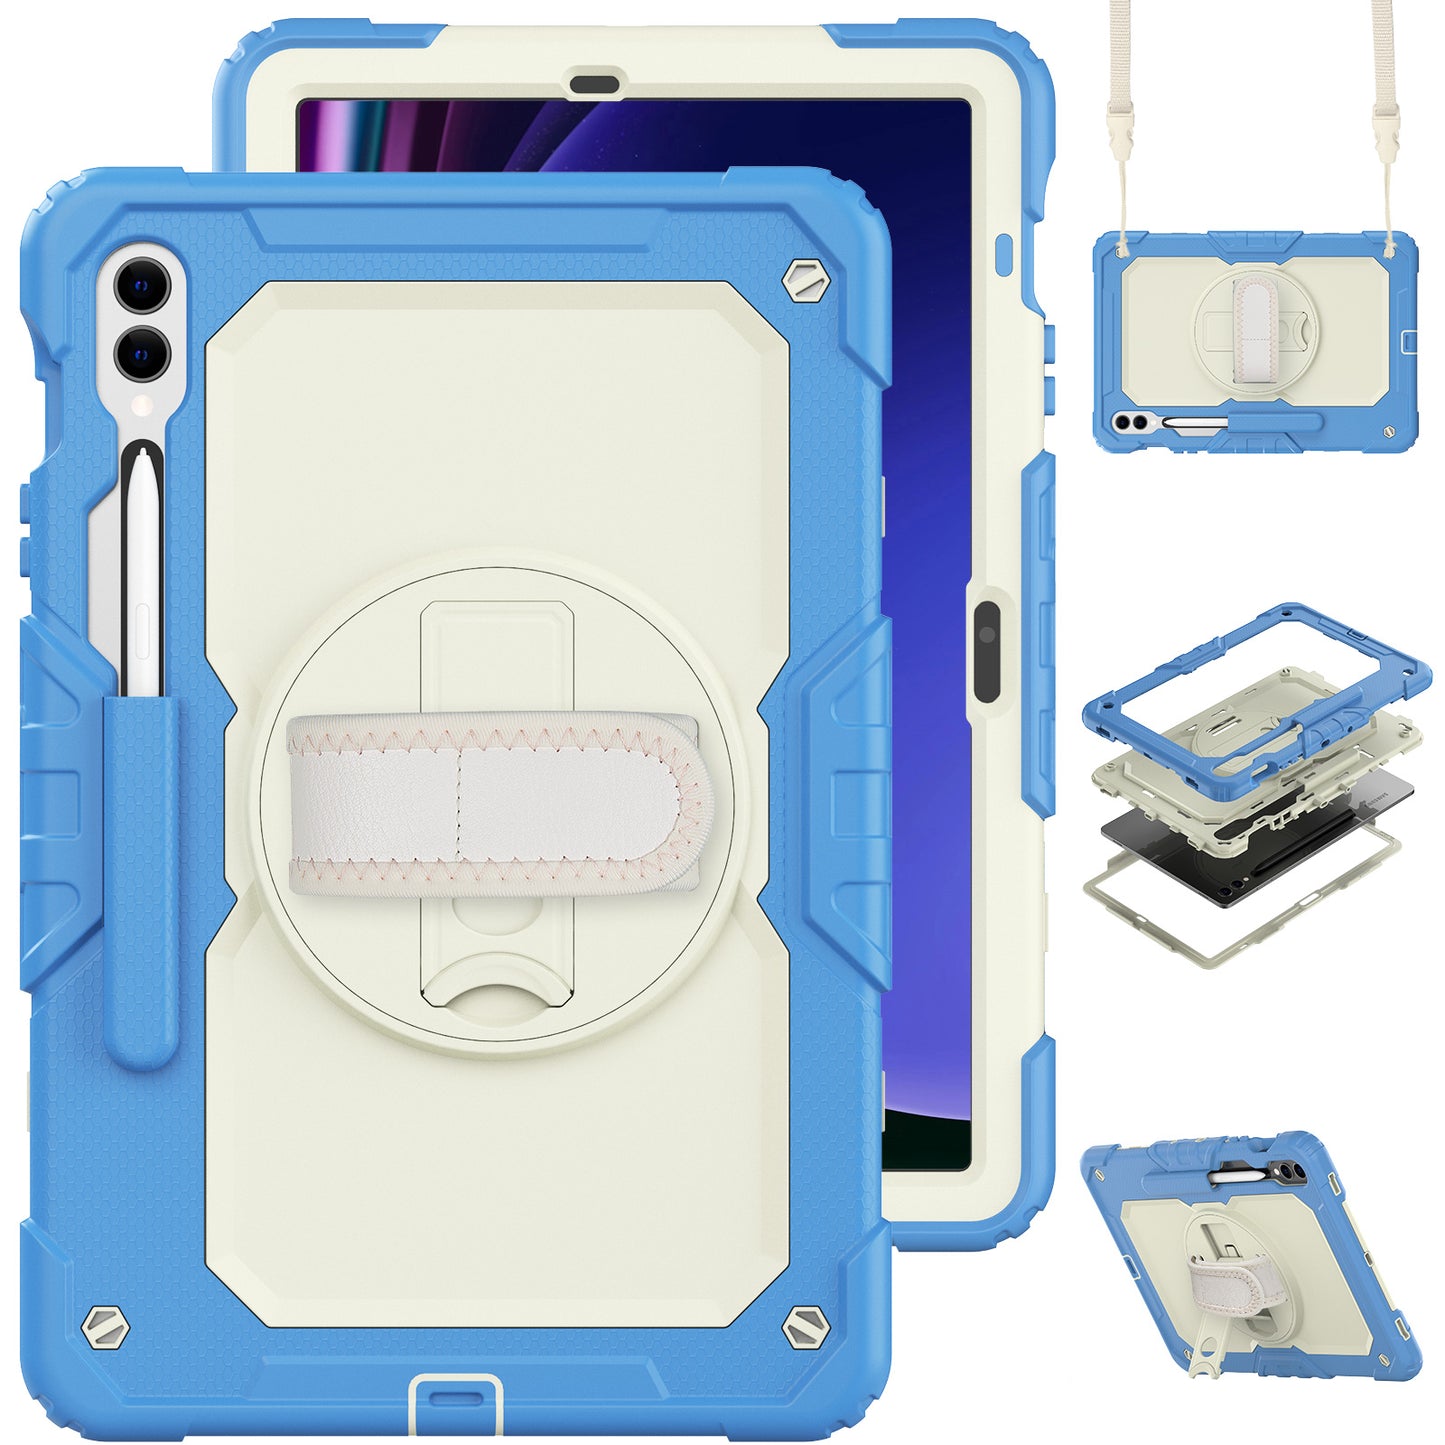 Tough Strap Galaxy Tab S9 FE Shockproof Case Multi-functional Built-in Screen Protector